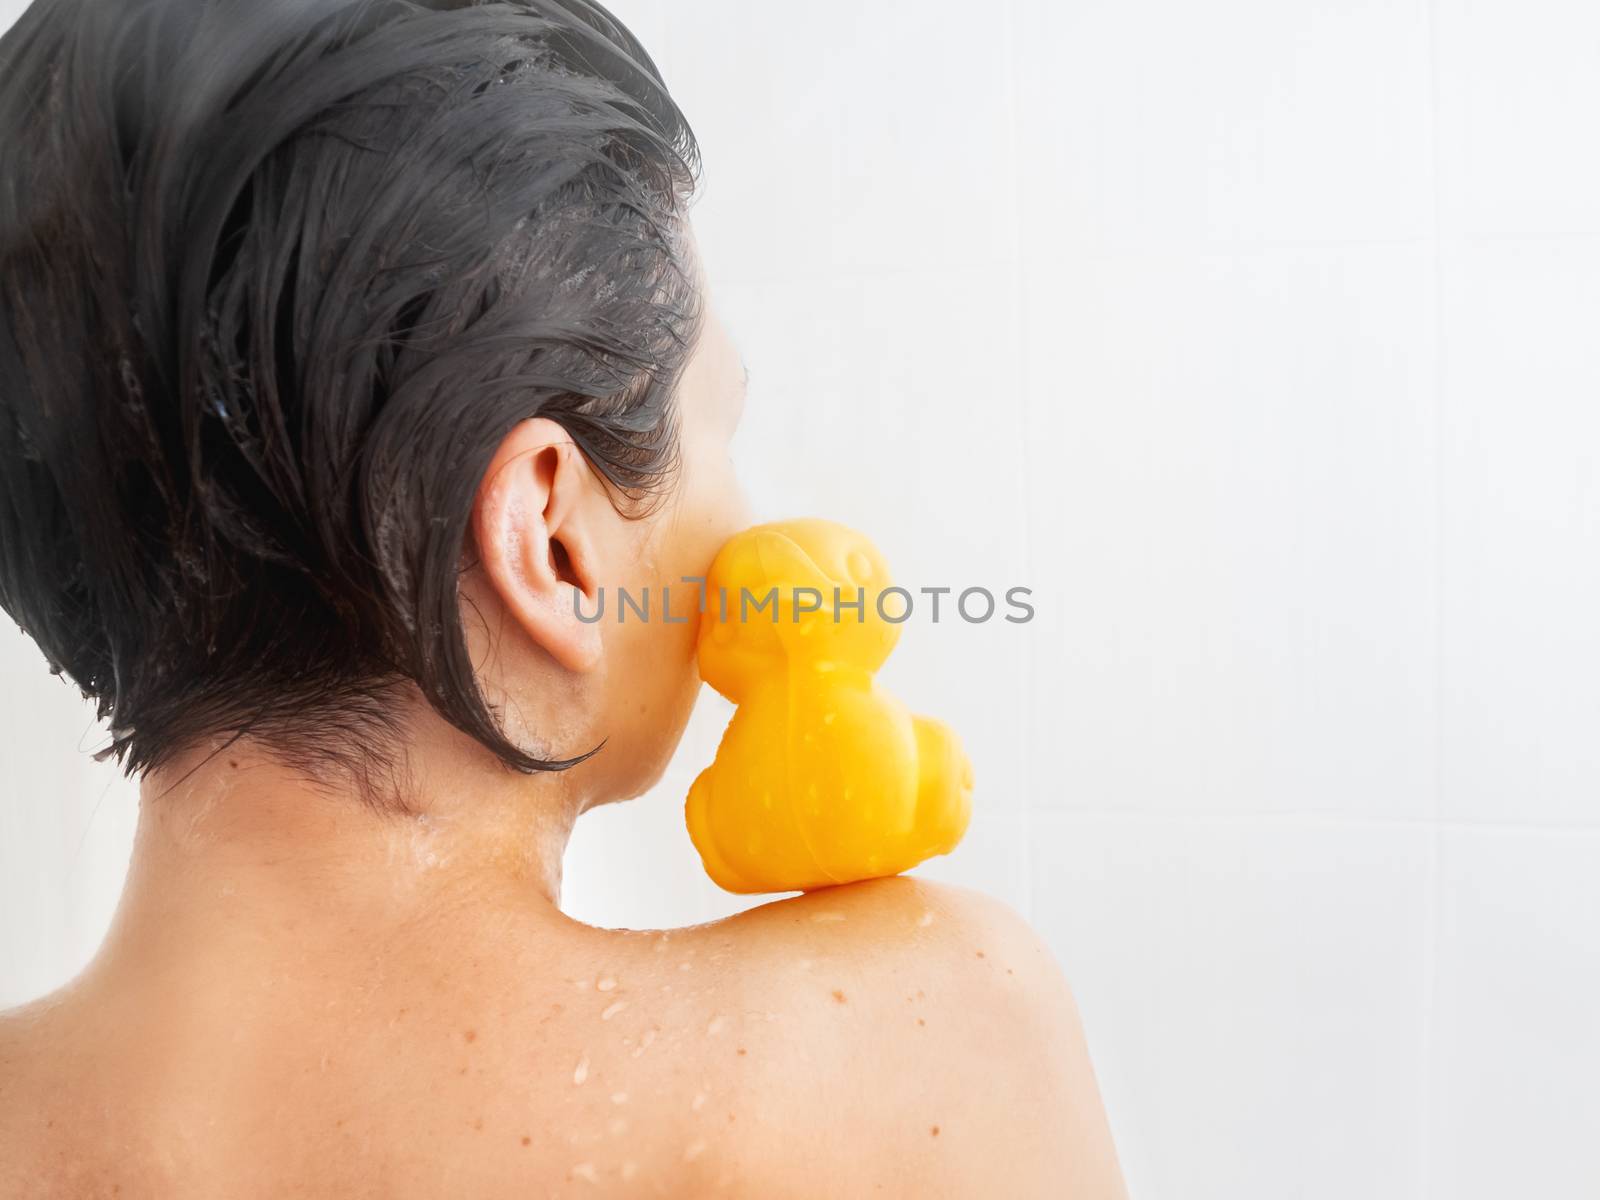 Naked woman with short hair takes a shower. Yellow rubber duck i by aksenovko